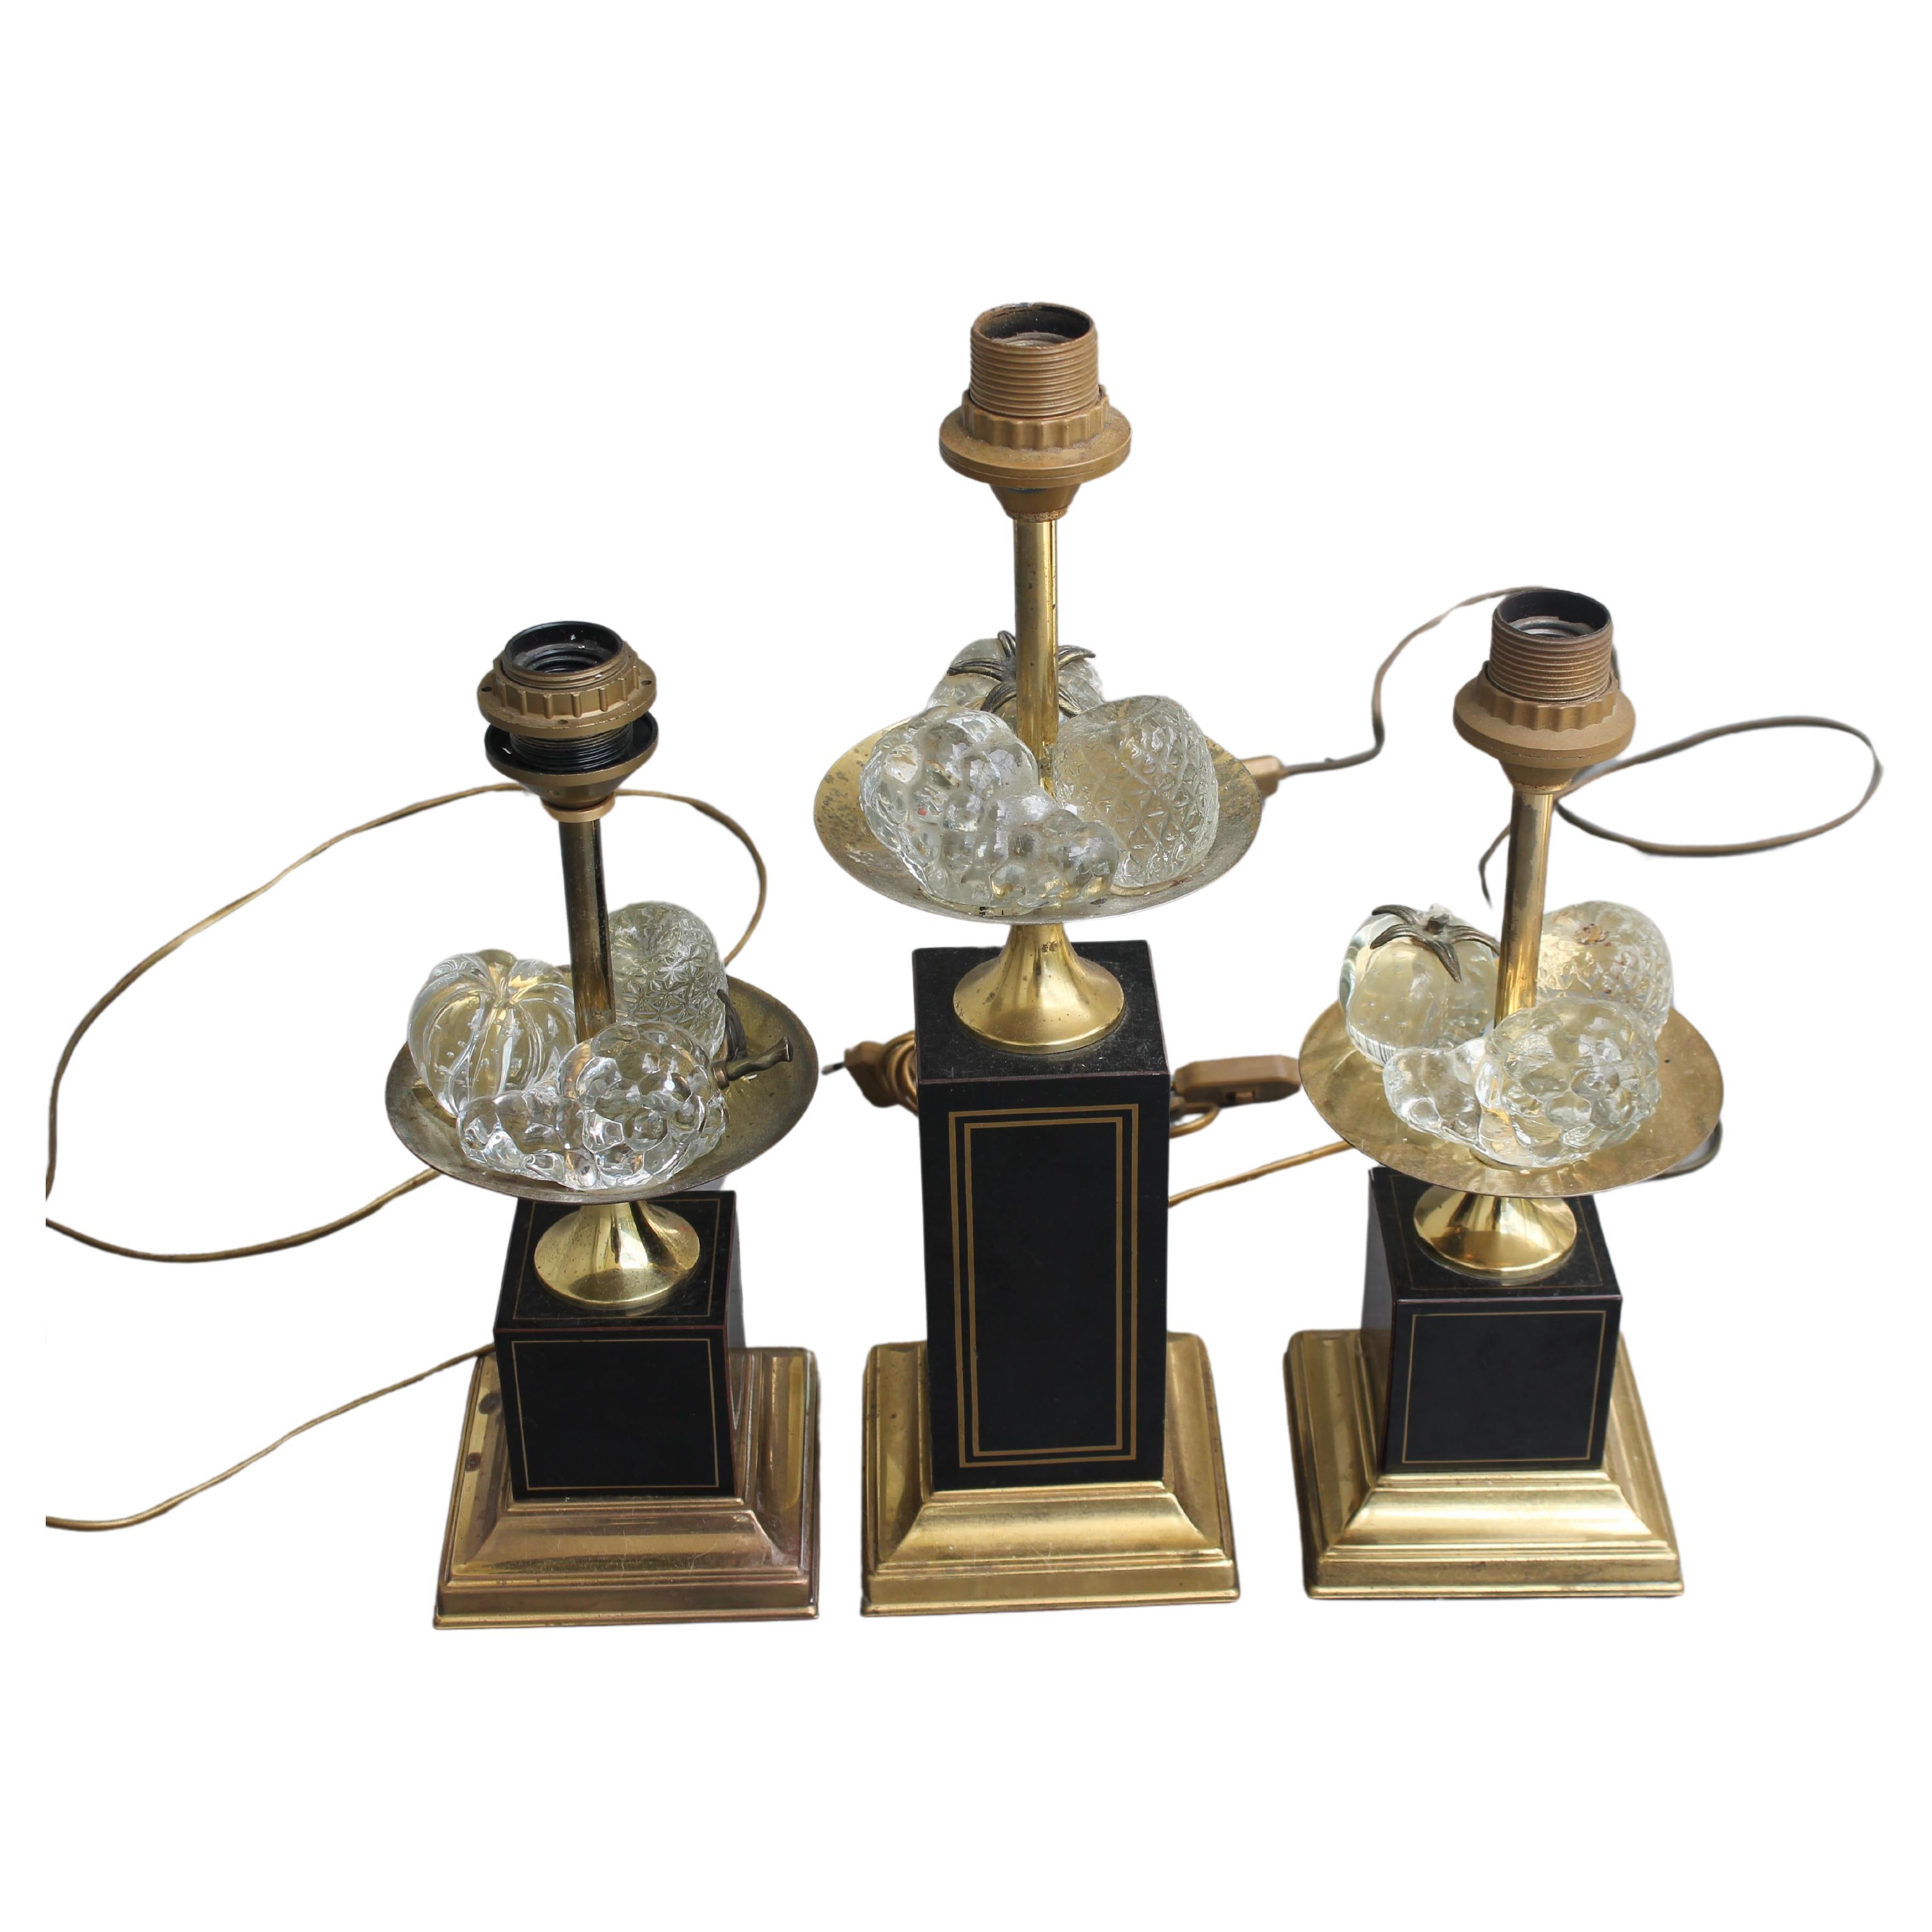 1960s French Set/3 Crystal Fruit Laden Table Lamps - Pair + 1 Bronze Table Lamps